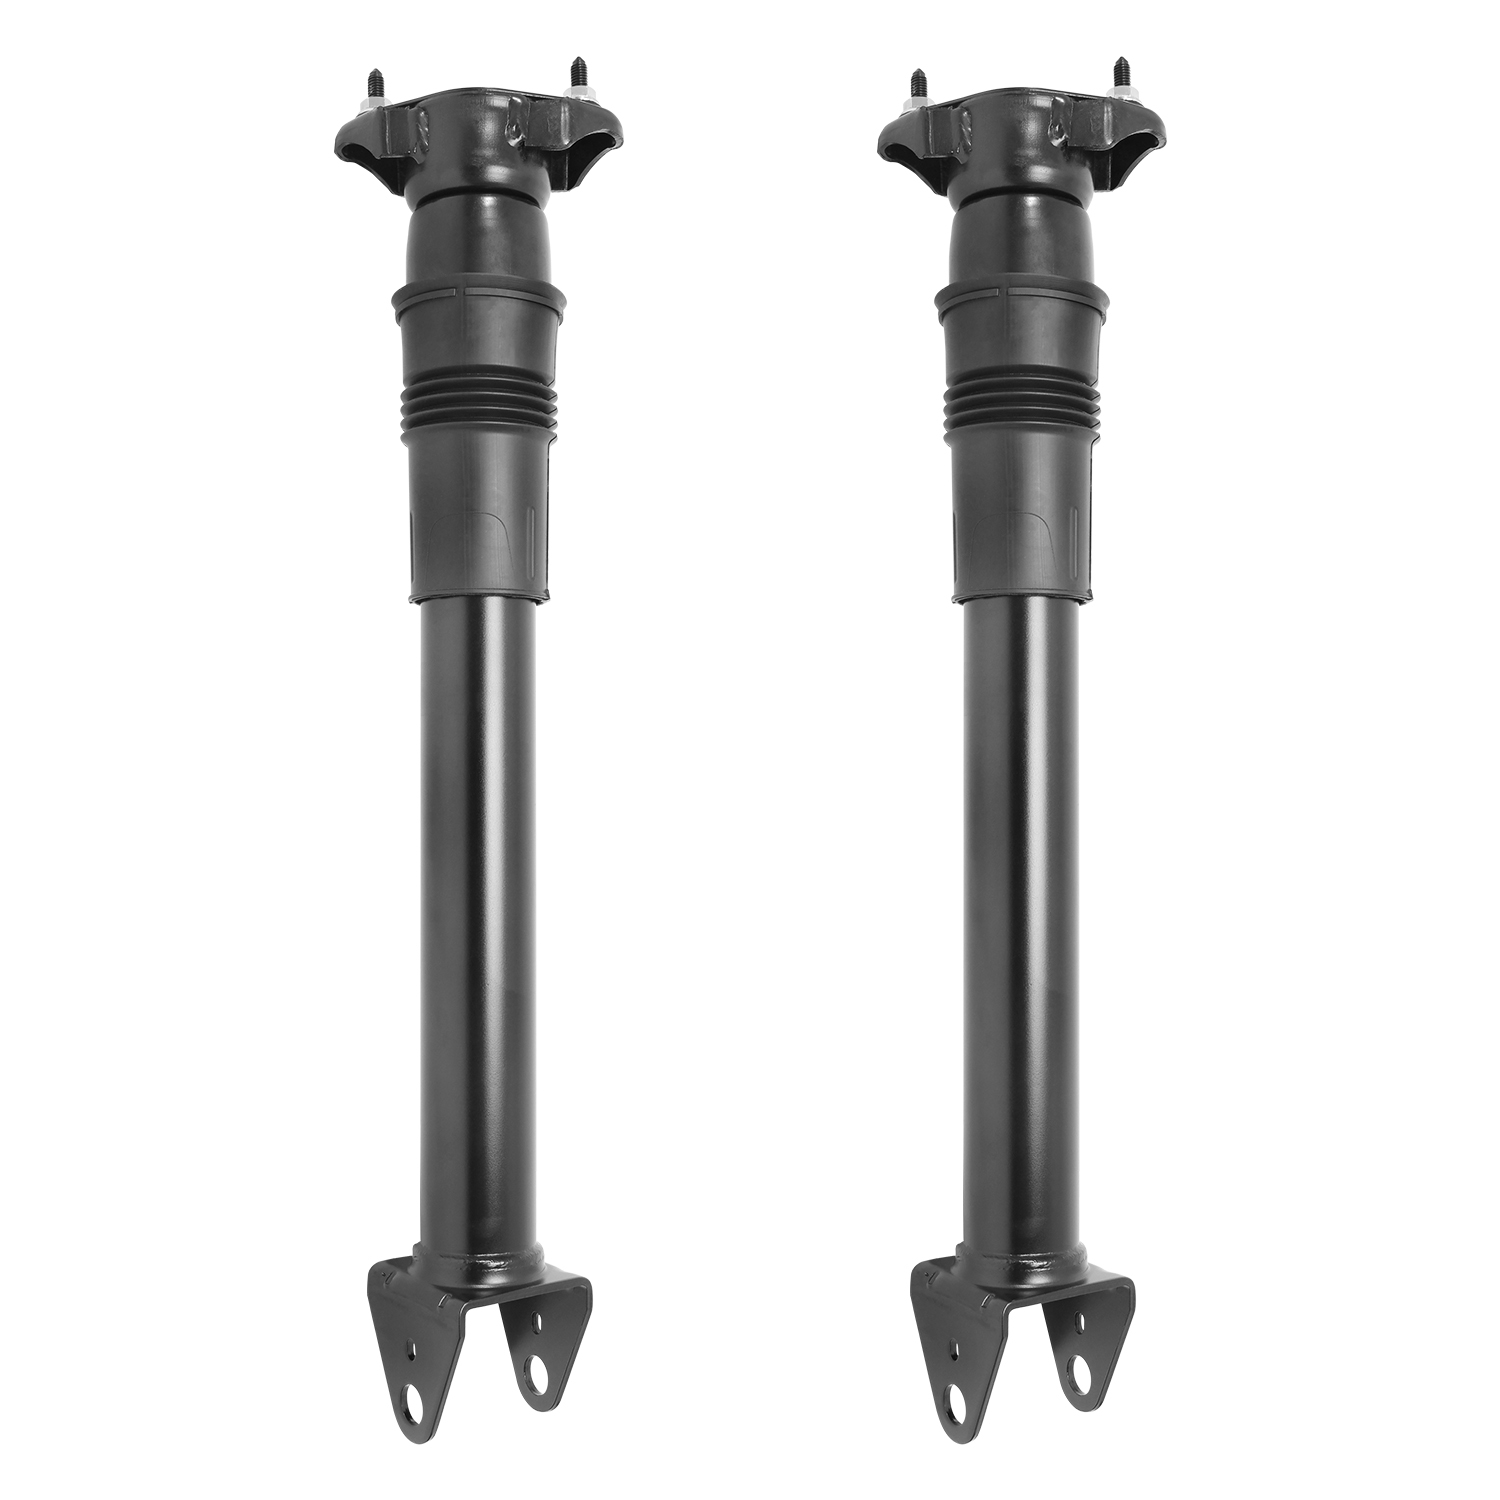 Pair of Rear Gas Shock Absorbers for Suspension in Mercedes GL, GLE & ML Class W166 X166